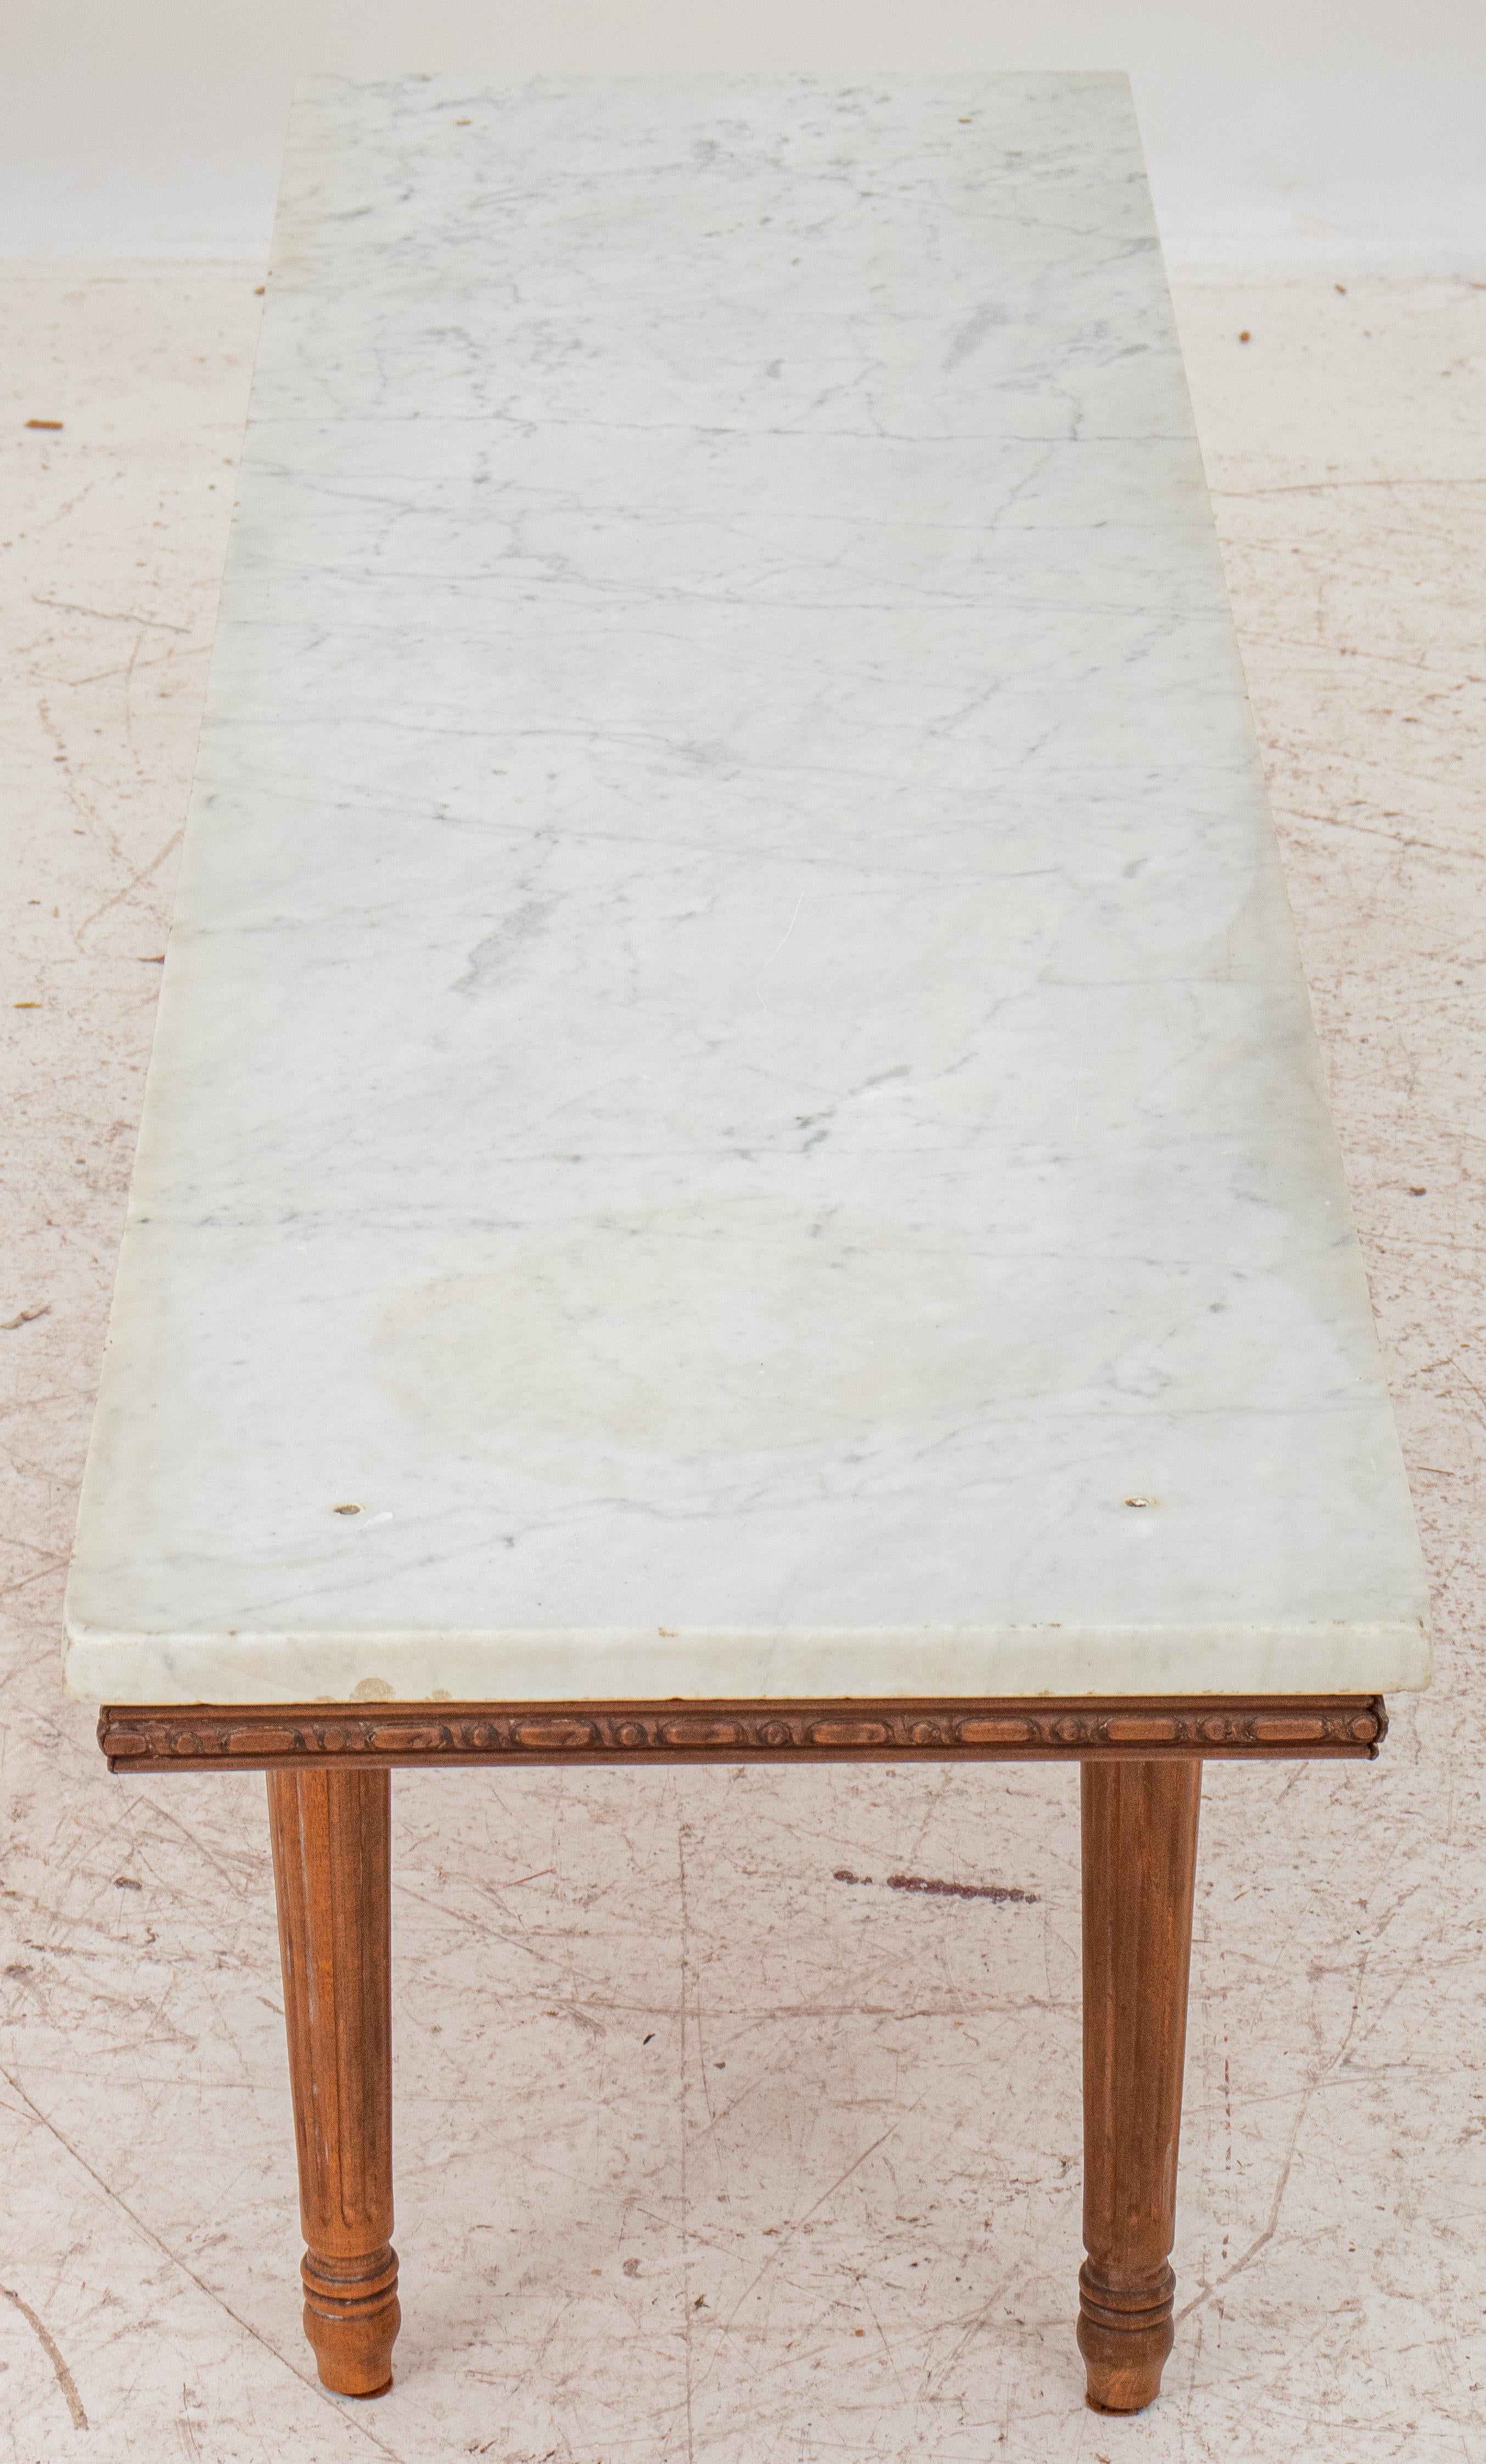 Neoclassical Style wood low table or side table with Carrara marble top, raised on four fluted tapered legs, circa early twentieth century. Measures: 16.5